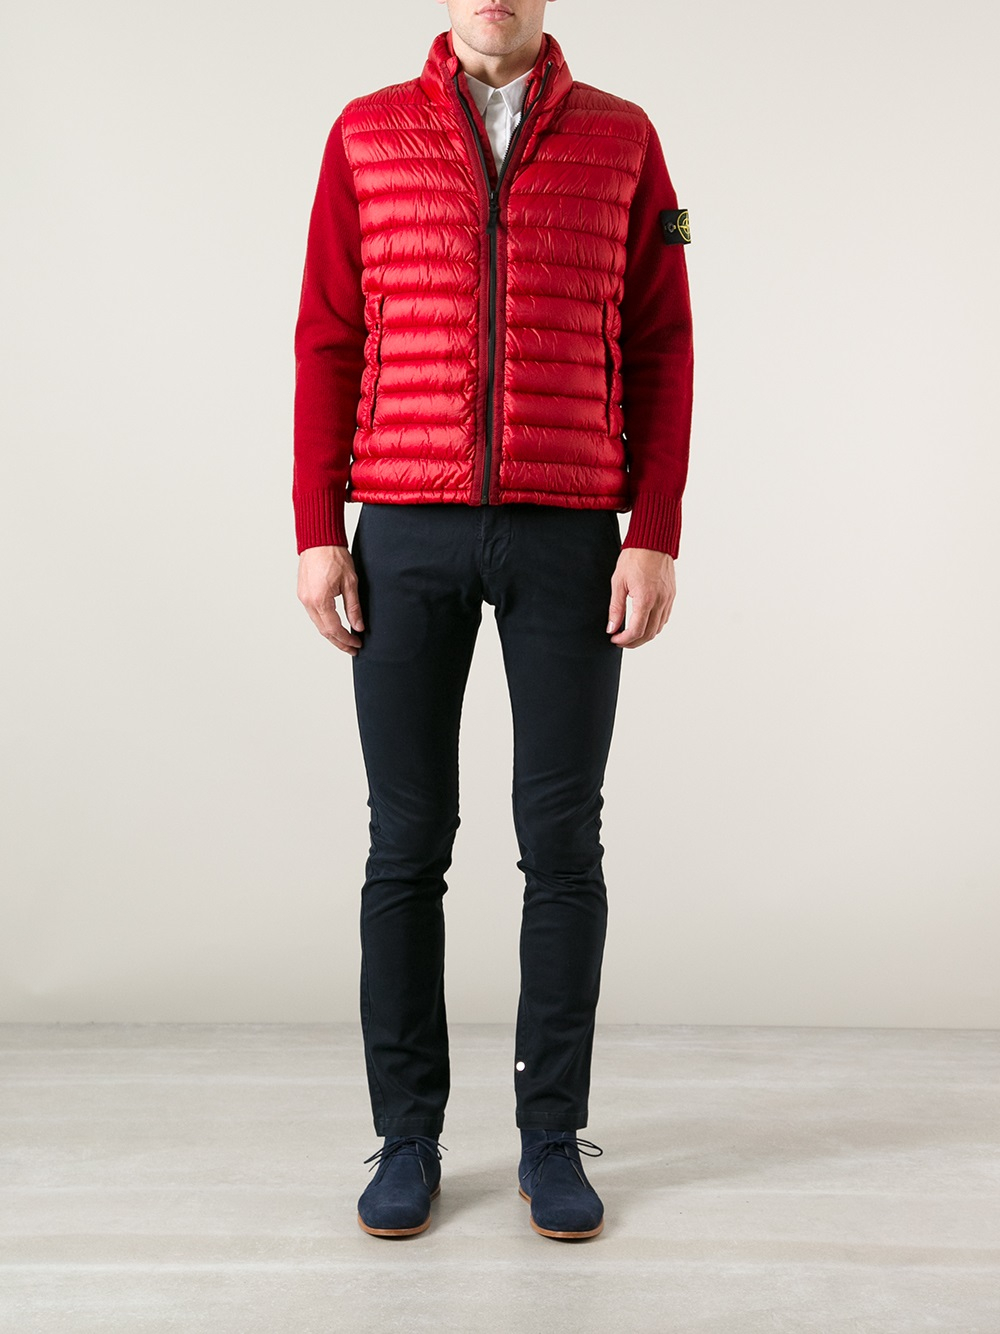 Stone Island Stone Island Padded Gilet in Red for Men - Lyst